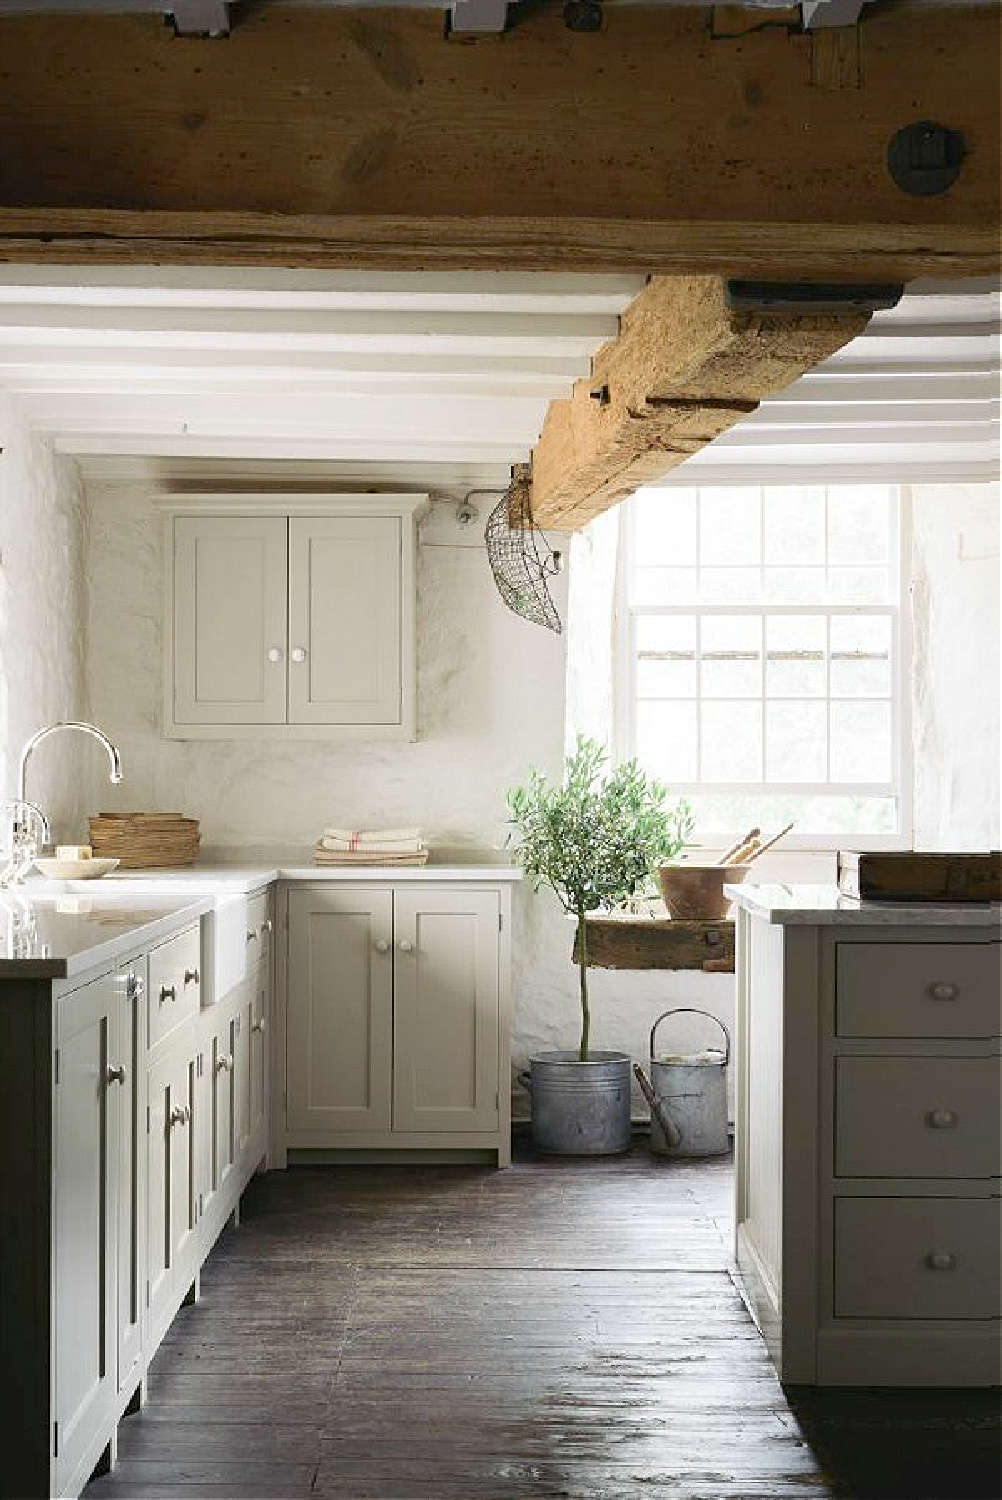 English country kitchen with beautiful bespoke design by deVOL. Rustic wood ceiling beams, custom Shaker cabinetry, and timeless style. #timelesskitchens